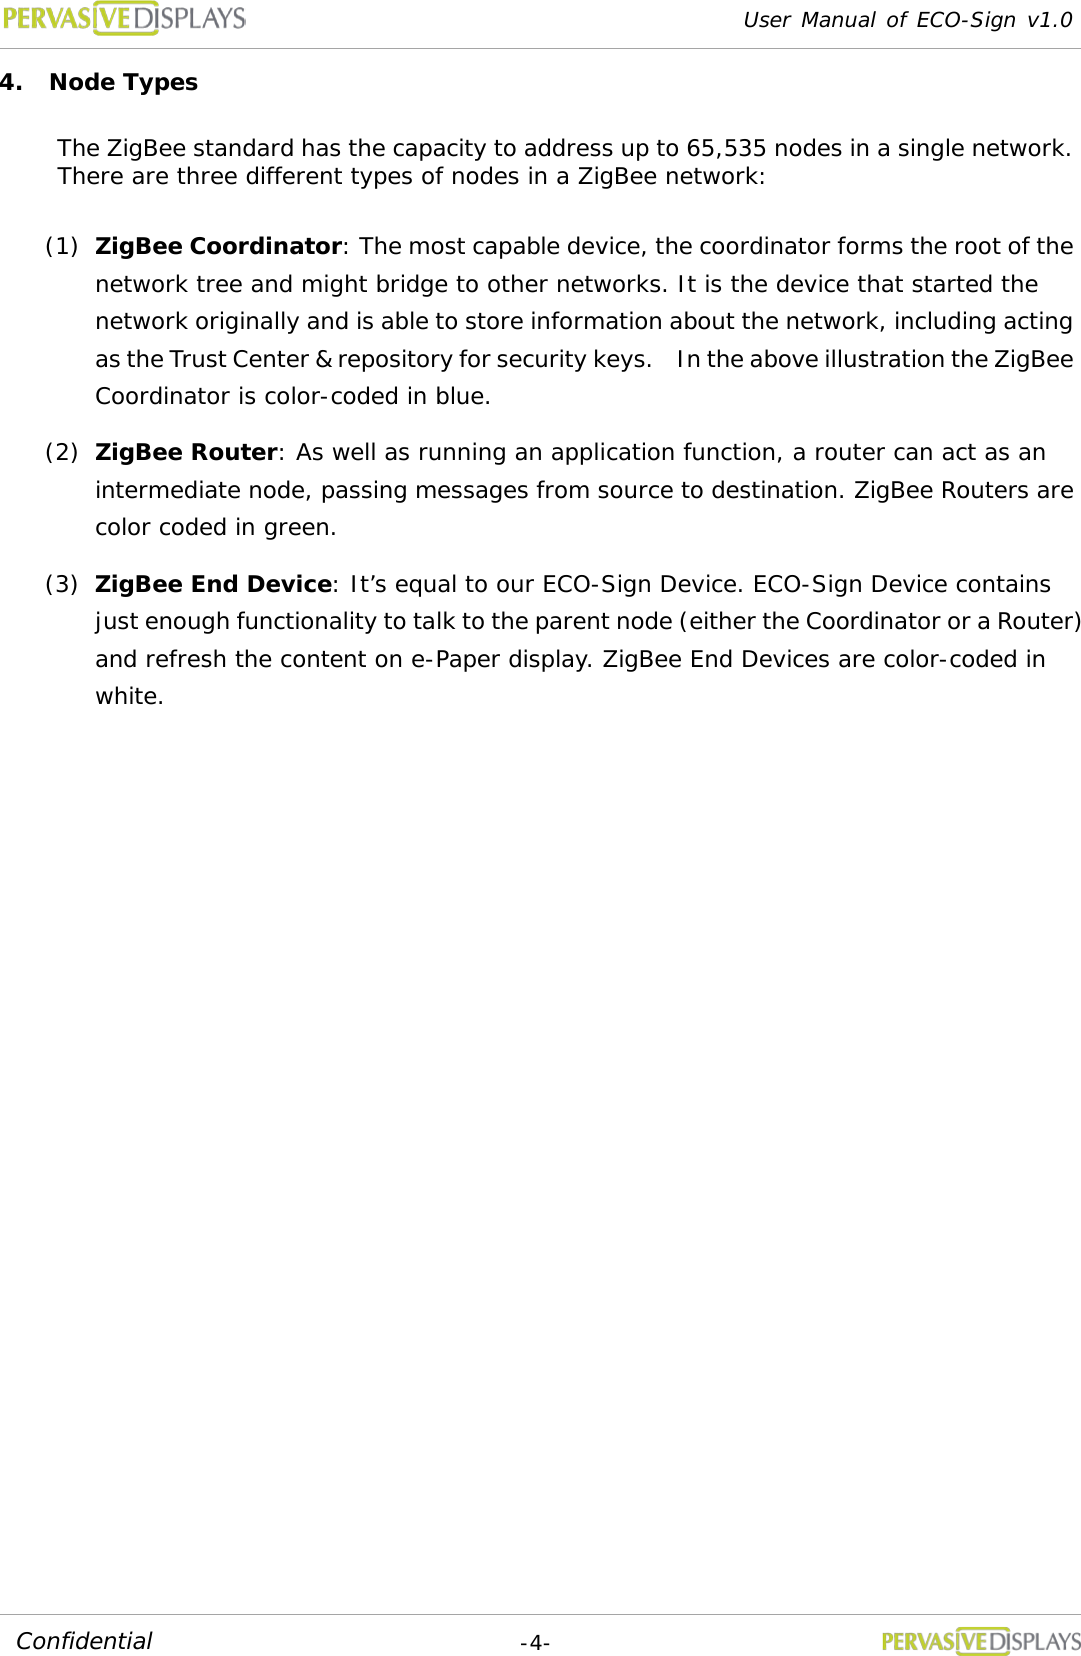 User Manual of ECO-Sign v1.0  -4- Confidential 4. Node Types The ZigBee standard has the capacity to address up to 65,535 nodes in a single network. There are three different types of nodes in a ZigBee network: (1) ZigBee Coordinator: The most capable device, the coordinator forms the root of the network tree and might bridge to other networks. It is the device that started the network originally and is able to store information about the network, including acting as the Trust Center &amp; repository for security keys.  In the above illustration the ZigBee Coordinator is color-coded in blue. (2) ZigBee Router: As well as running an application function, a router can act as an intermediate node, passing messages from source to destination. ZigBee Routers are color coded in green. (3) ZigBee End Device: It’s equal to our ECO-Sign Device. ECO-Sign Device contains just enough functionality to talk to the parent node (either the Coordinator or a Router) and refresh the content on e-Paper display. ZigBee End Devices are color-coded in white.   